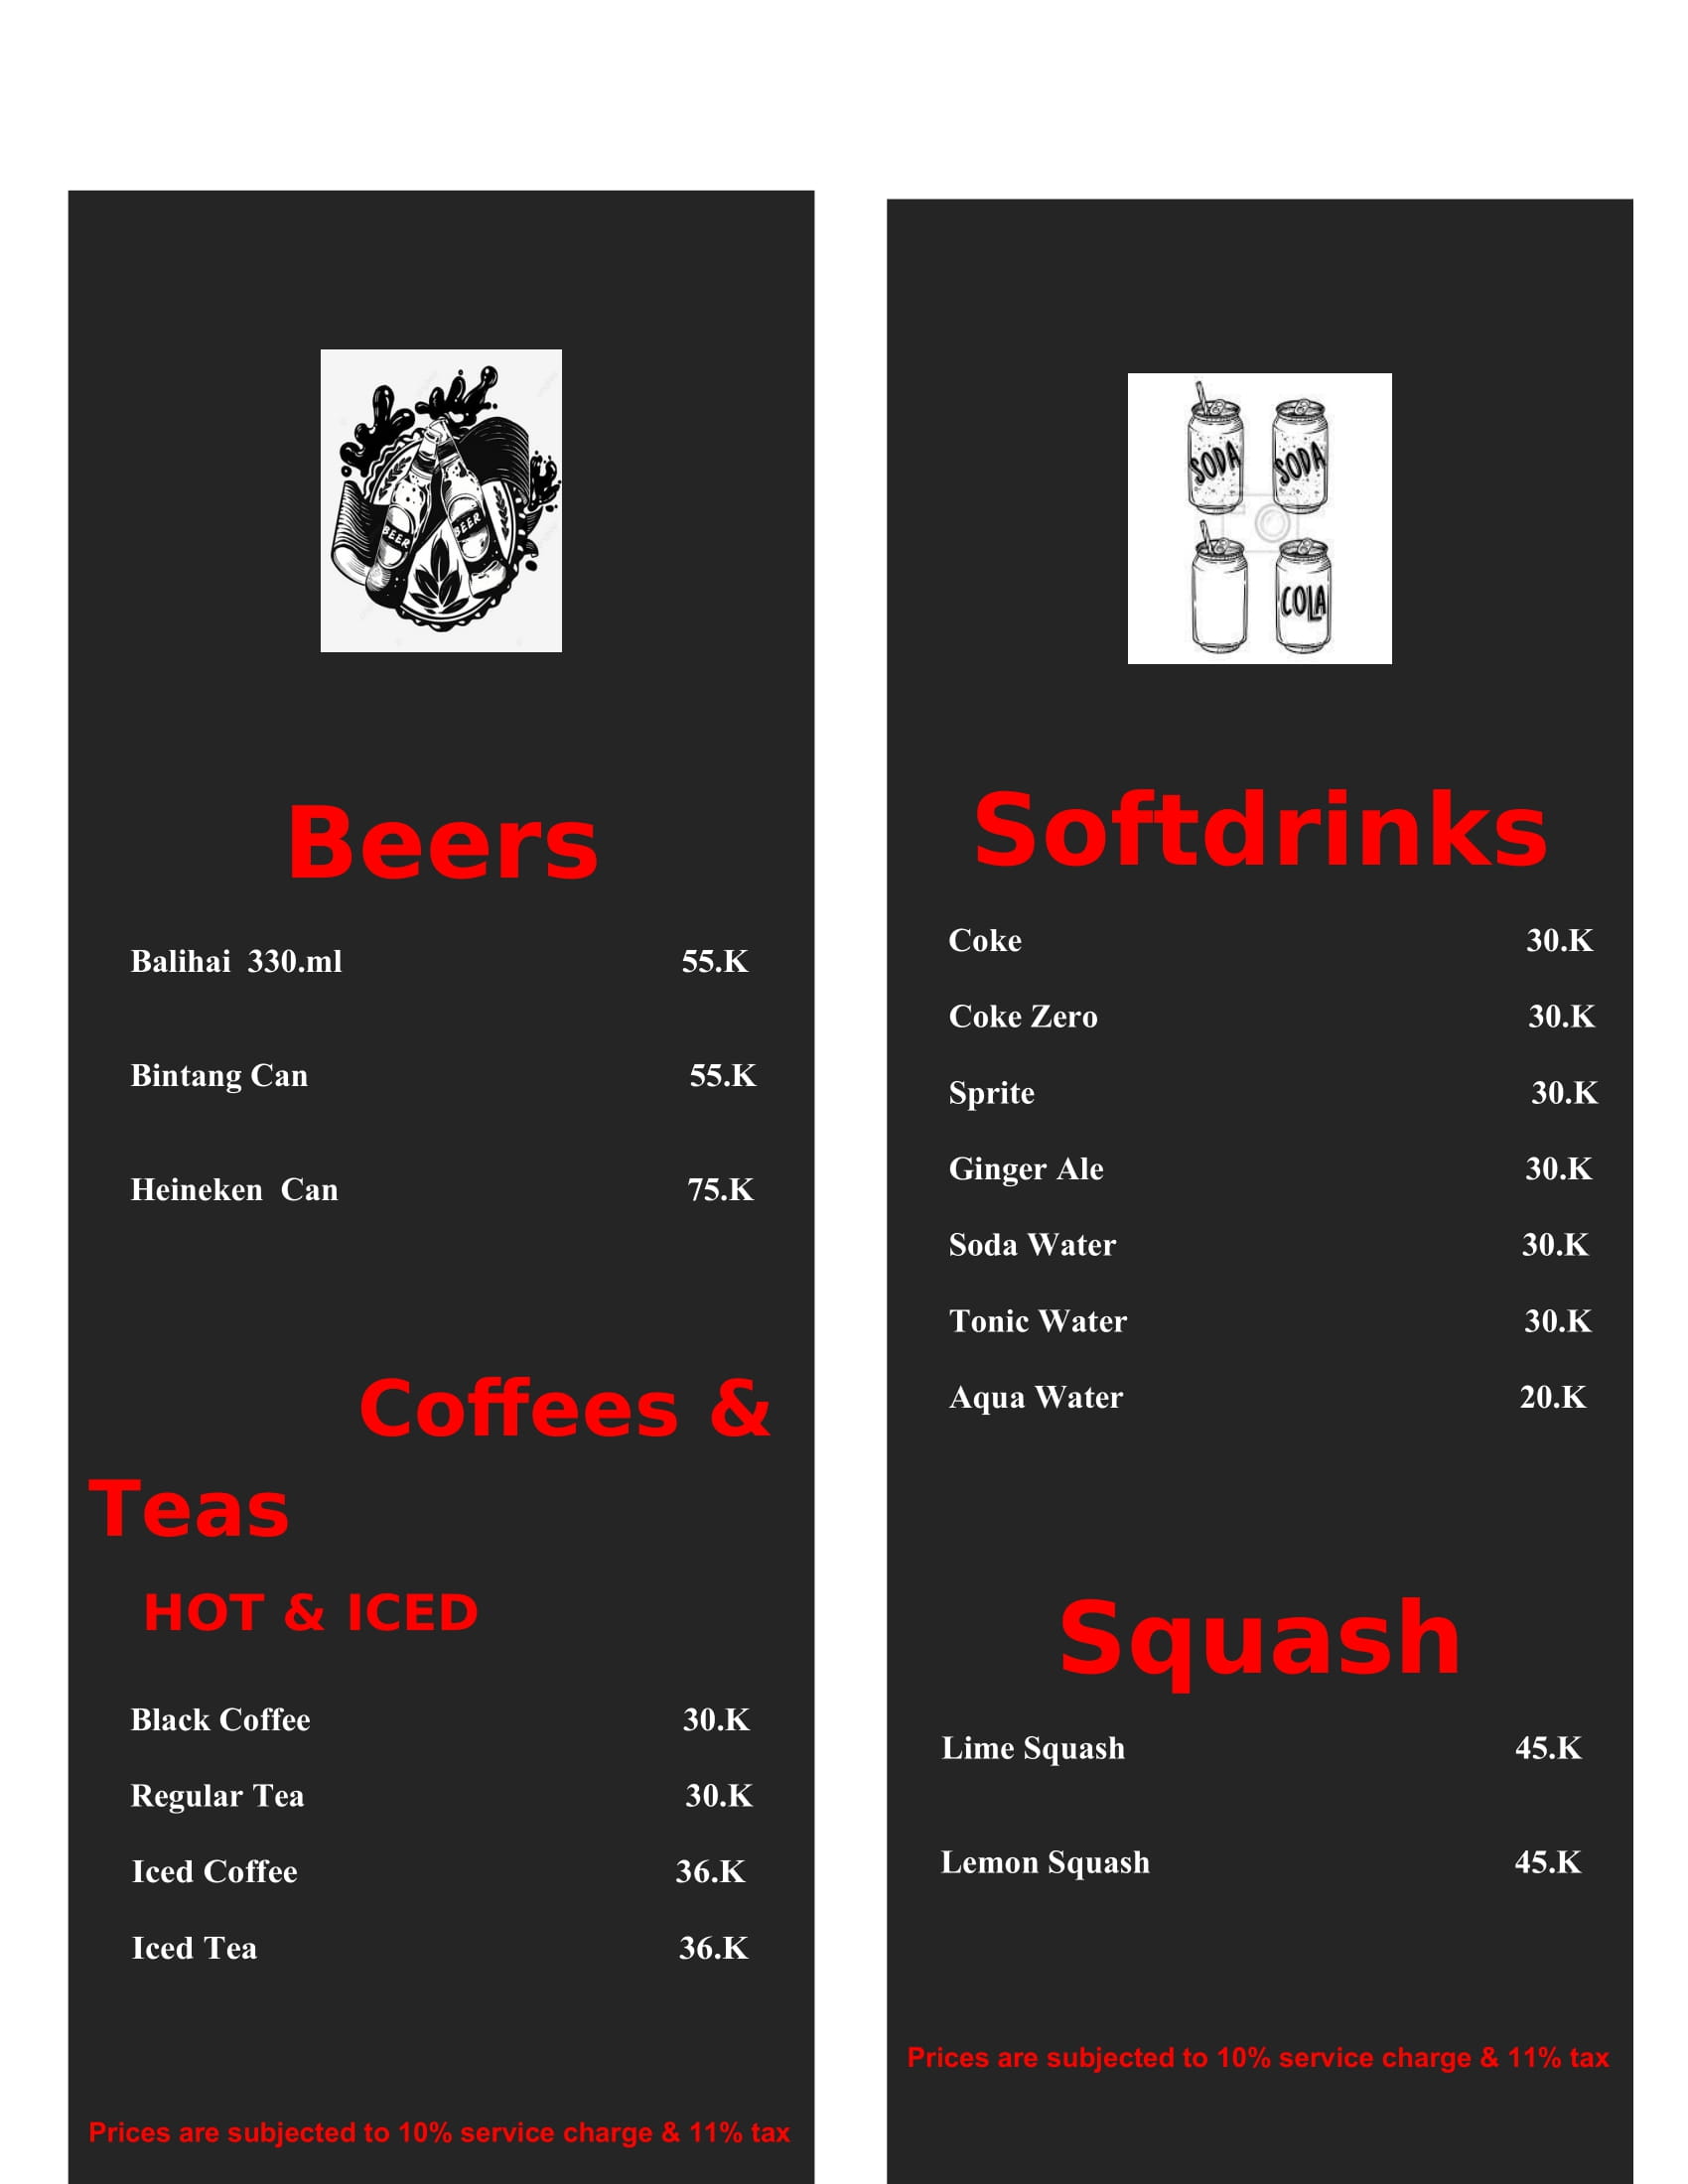 beer and softdrink